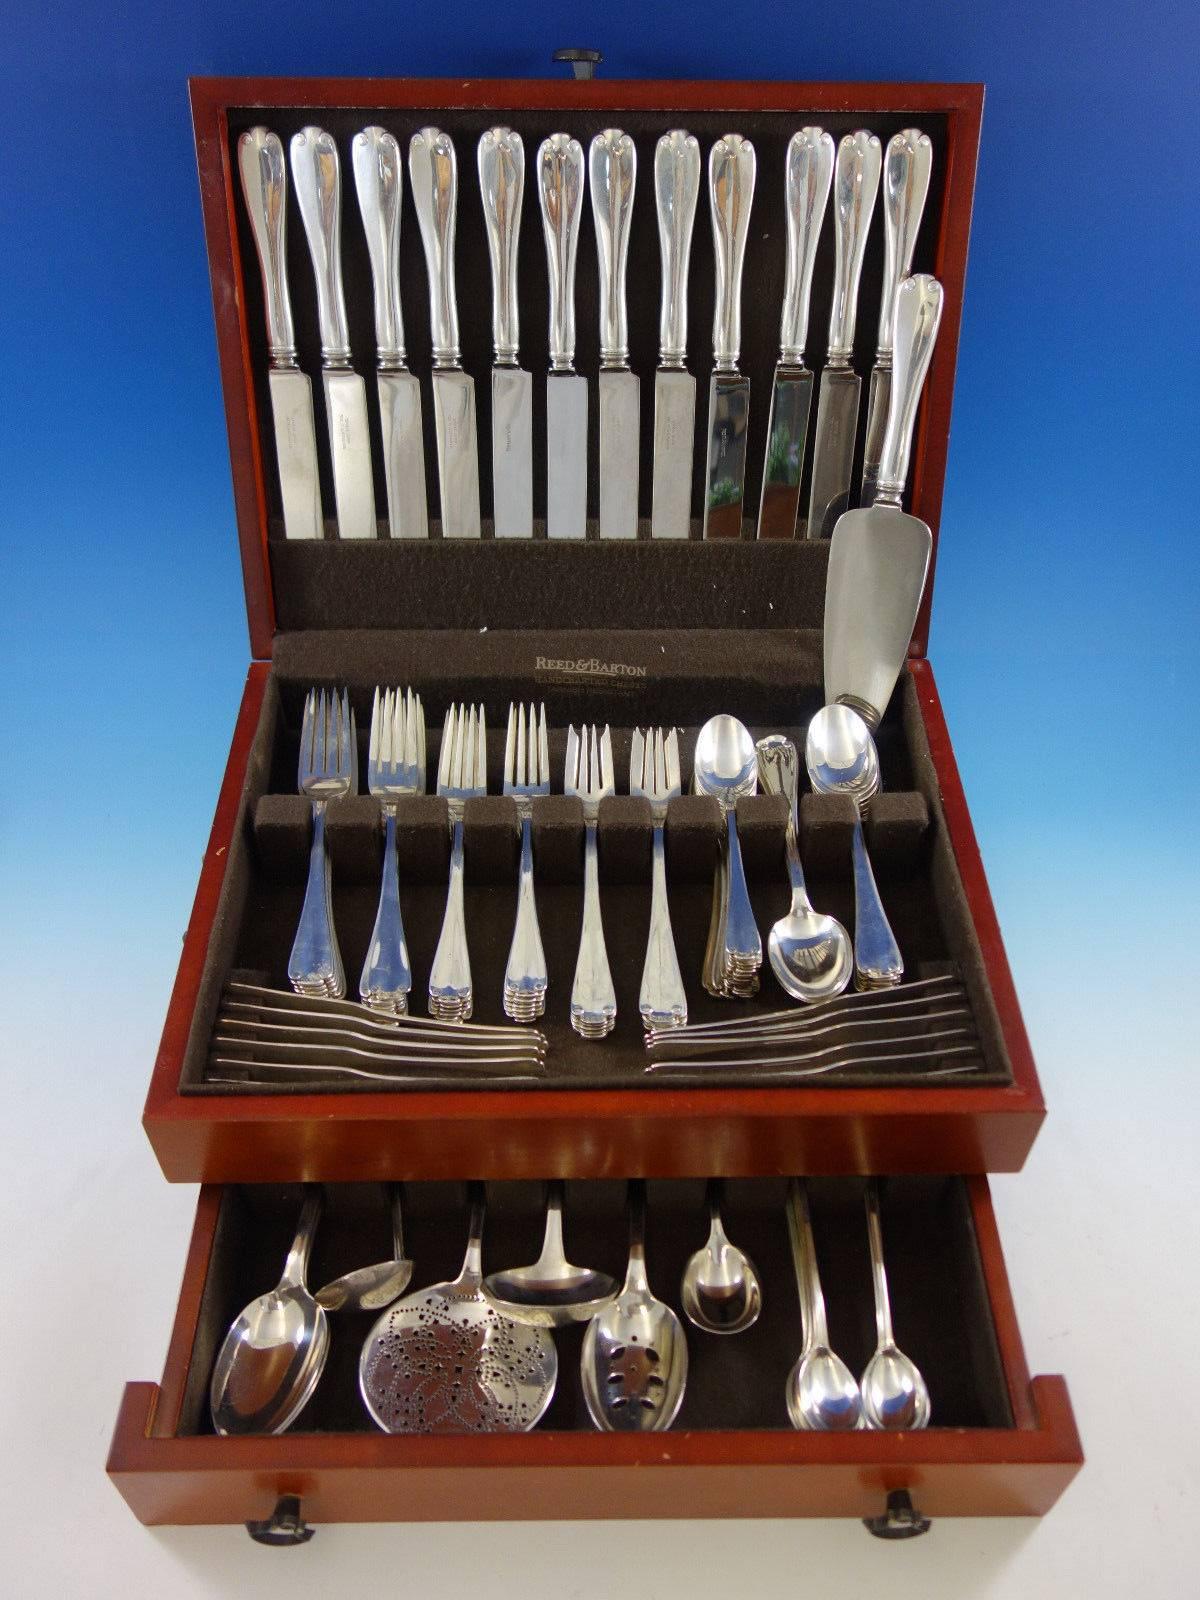 Dinner size Flemish by Tiffany & Co. sterling silver flatware set, 104 pieces. This set includes: 

12 dinner size knives, 10 1/4